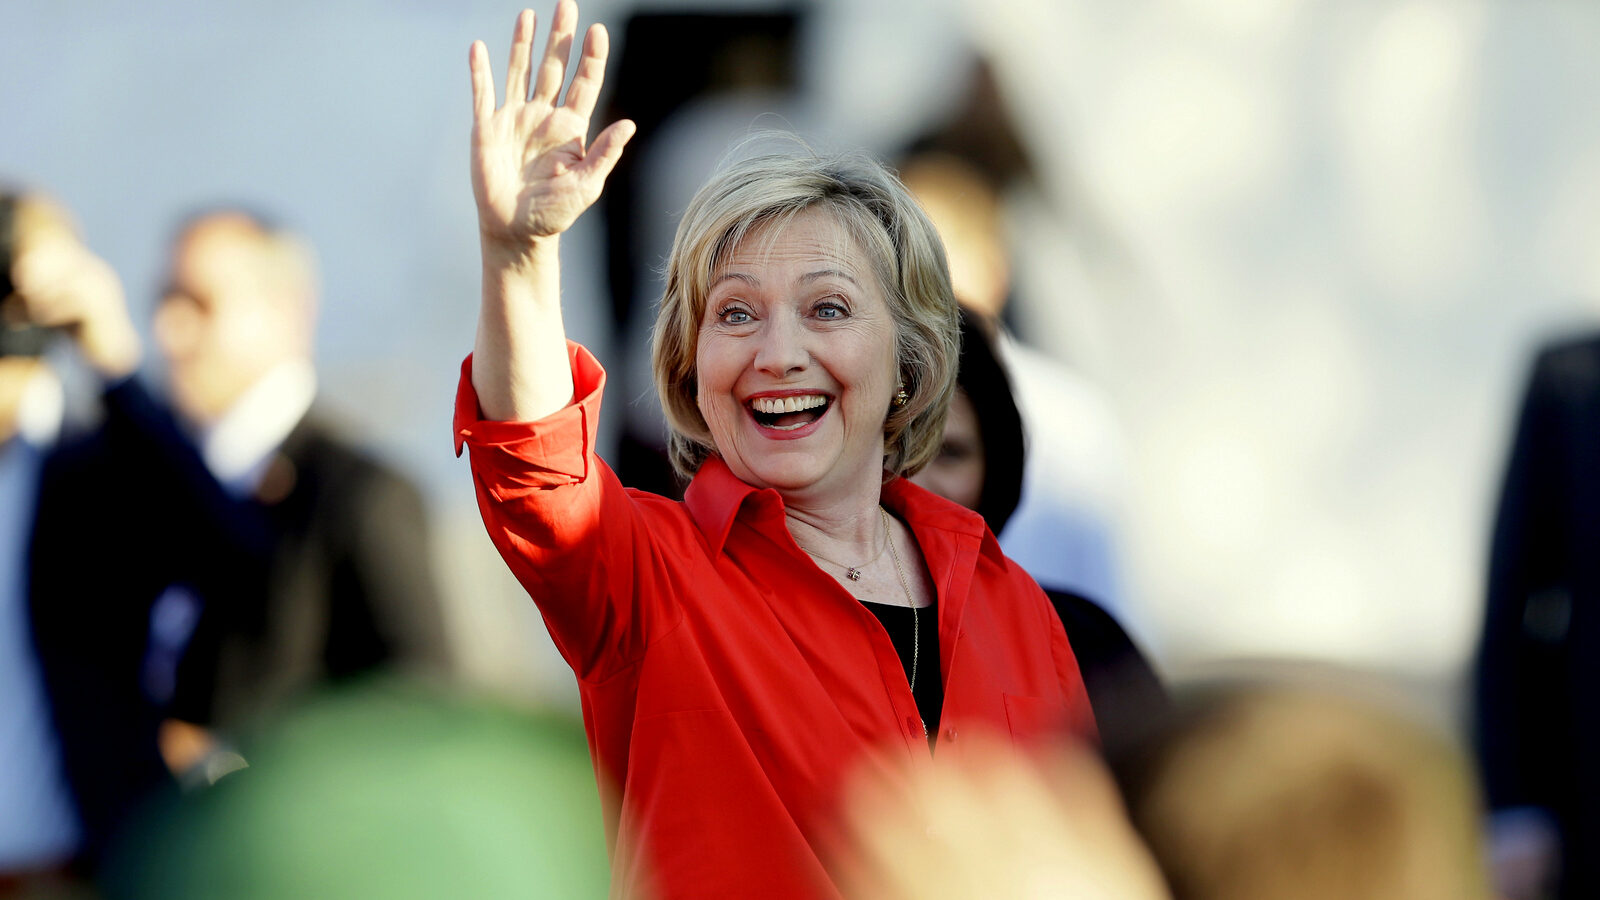 Democratic presidential candidate Hillary Rodham Clinton waves to supporter as she arrives at a town hall meeting, Tuesday, Nov. 3, 2015, in Coralville, Iowa. (AP Photo/Charlie Neibergall)S